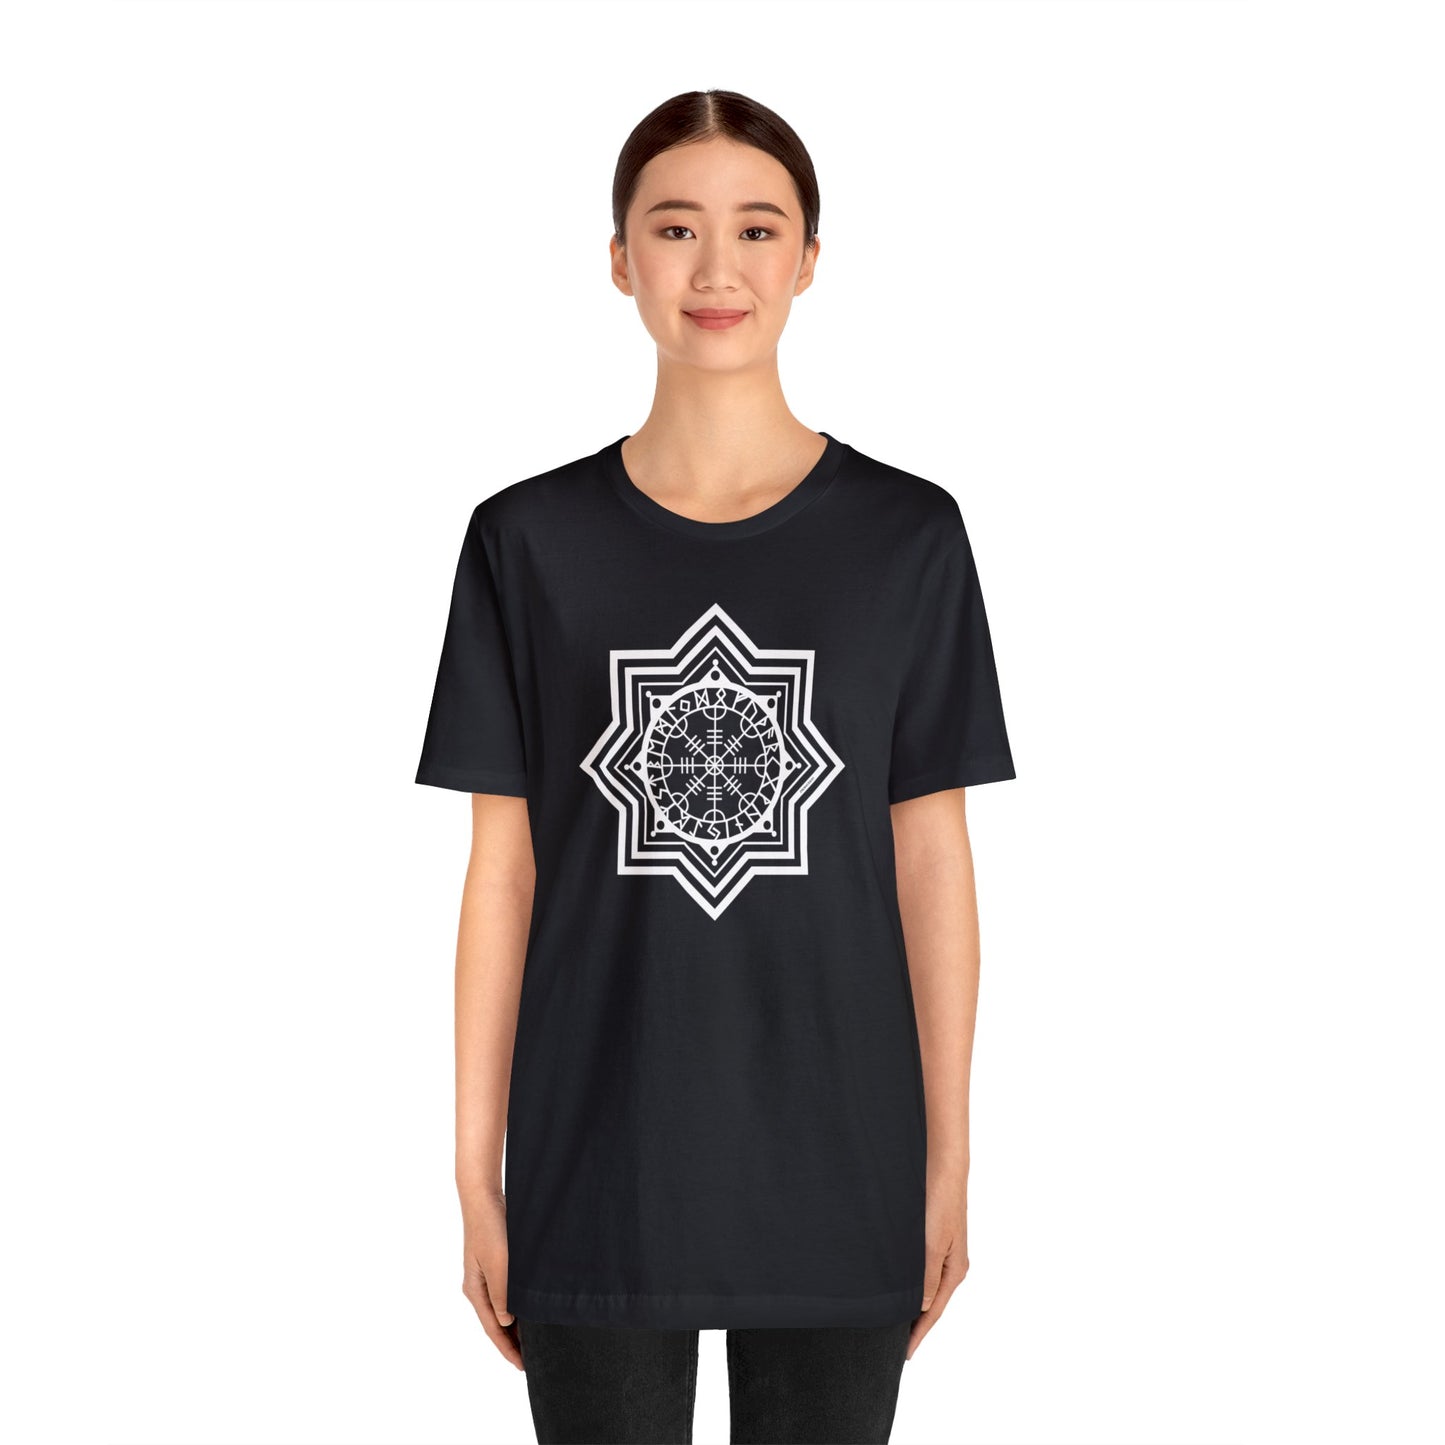 Spellcaster by Patti Negri "Protection" Unisex Tee